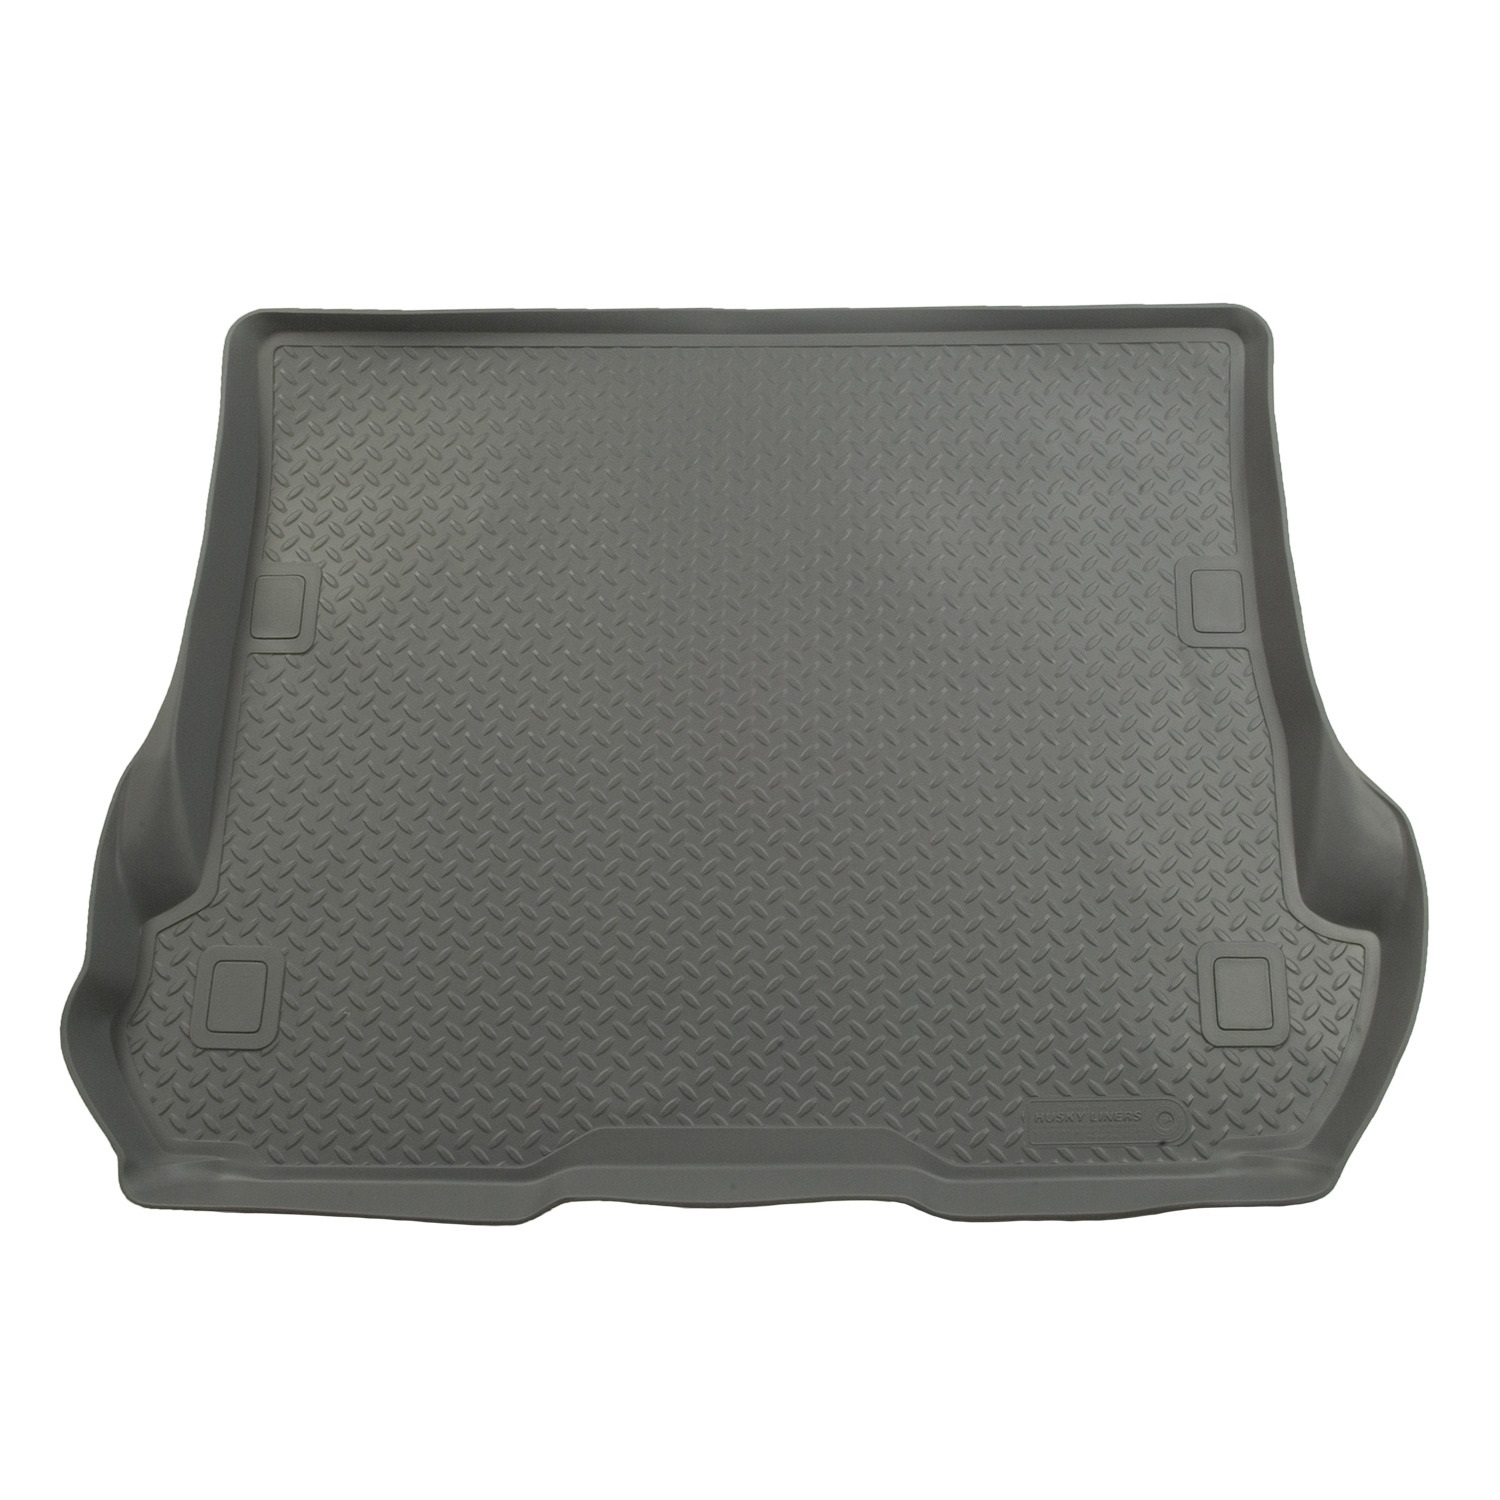 Husky Liners Husky Liners 25832 Classic Style; Cargo Liner Fits 04-09 RX330 RX350 RX400h